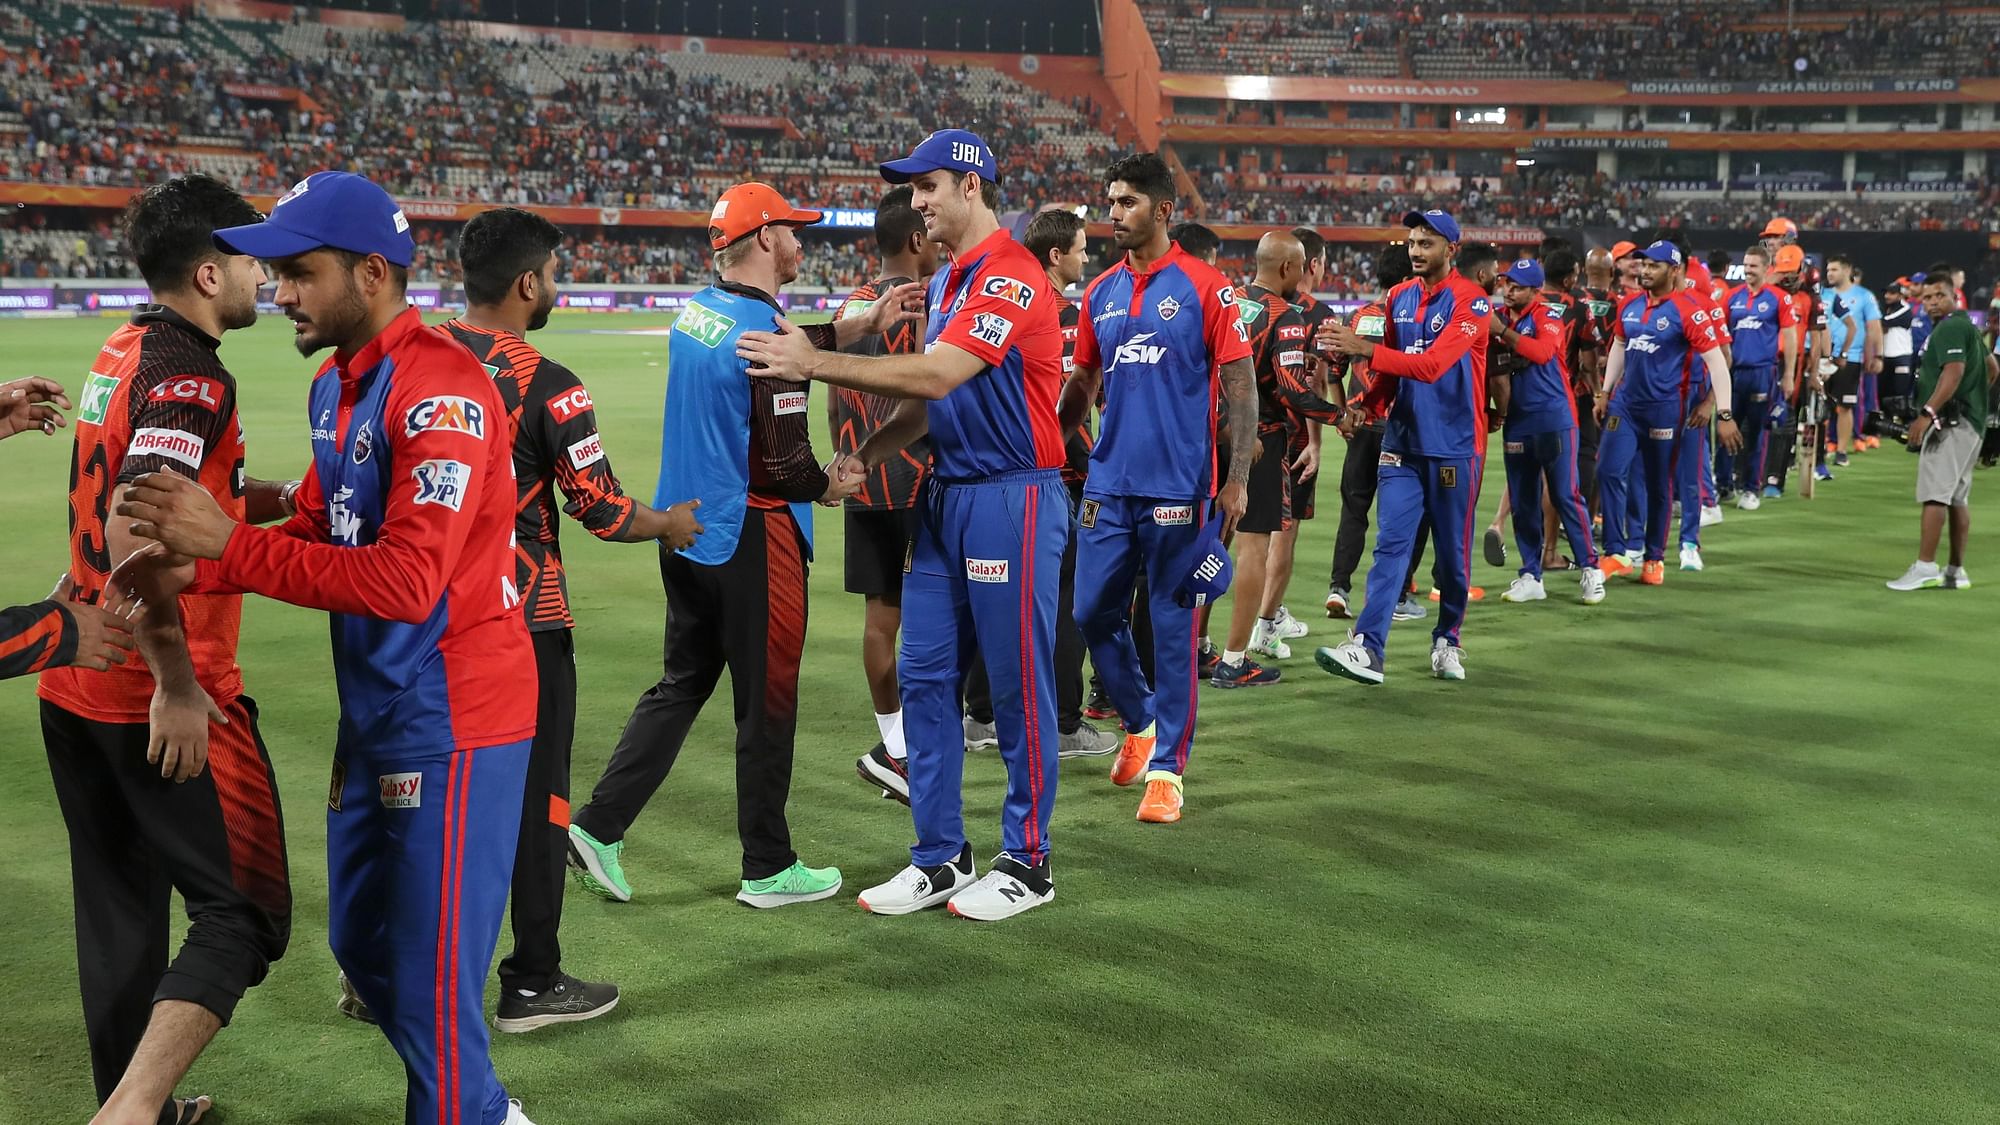 <div class="paragraphs"><p>Delhi Capitals defeat Sunrisers Hyderabad by 7 runs to clinch their second victory of the season</p></div>